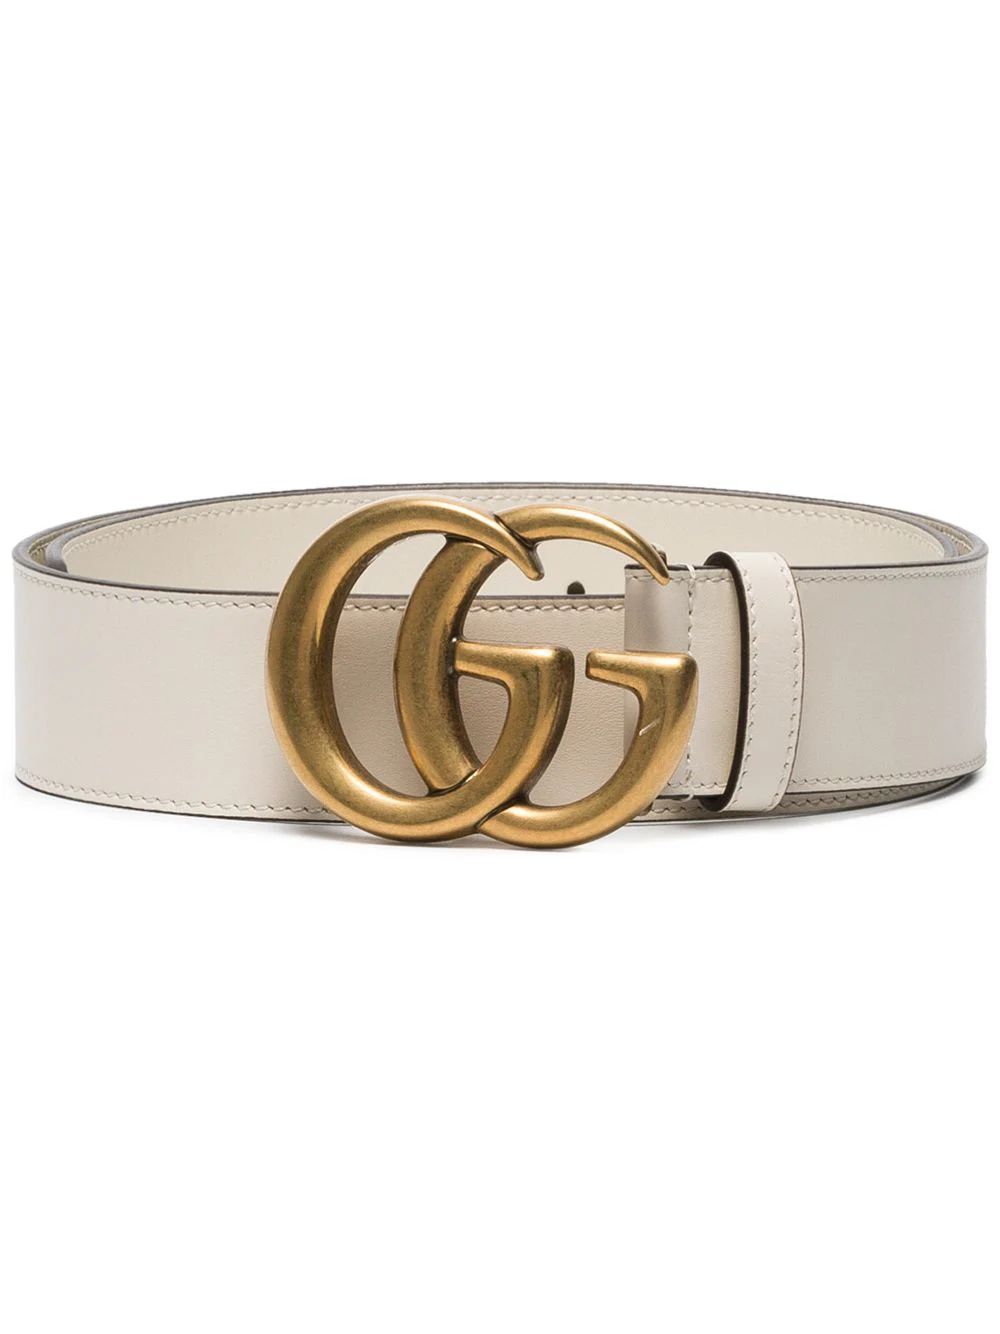 Gucci white Leather belt with Double G buckle | FarFetch Global